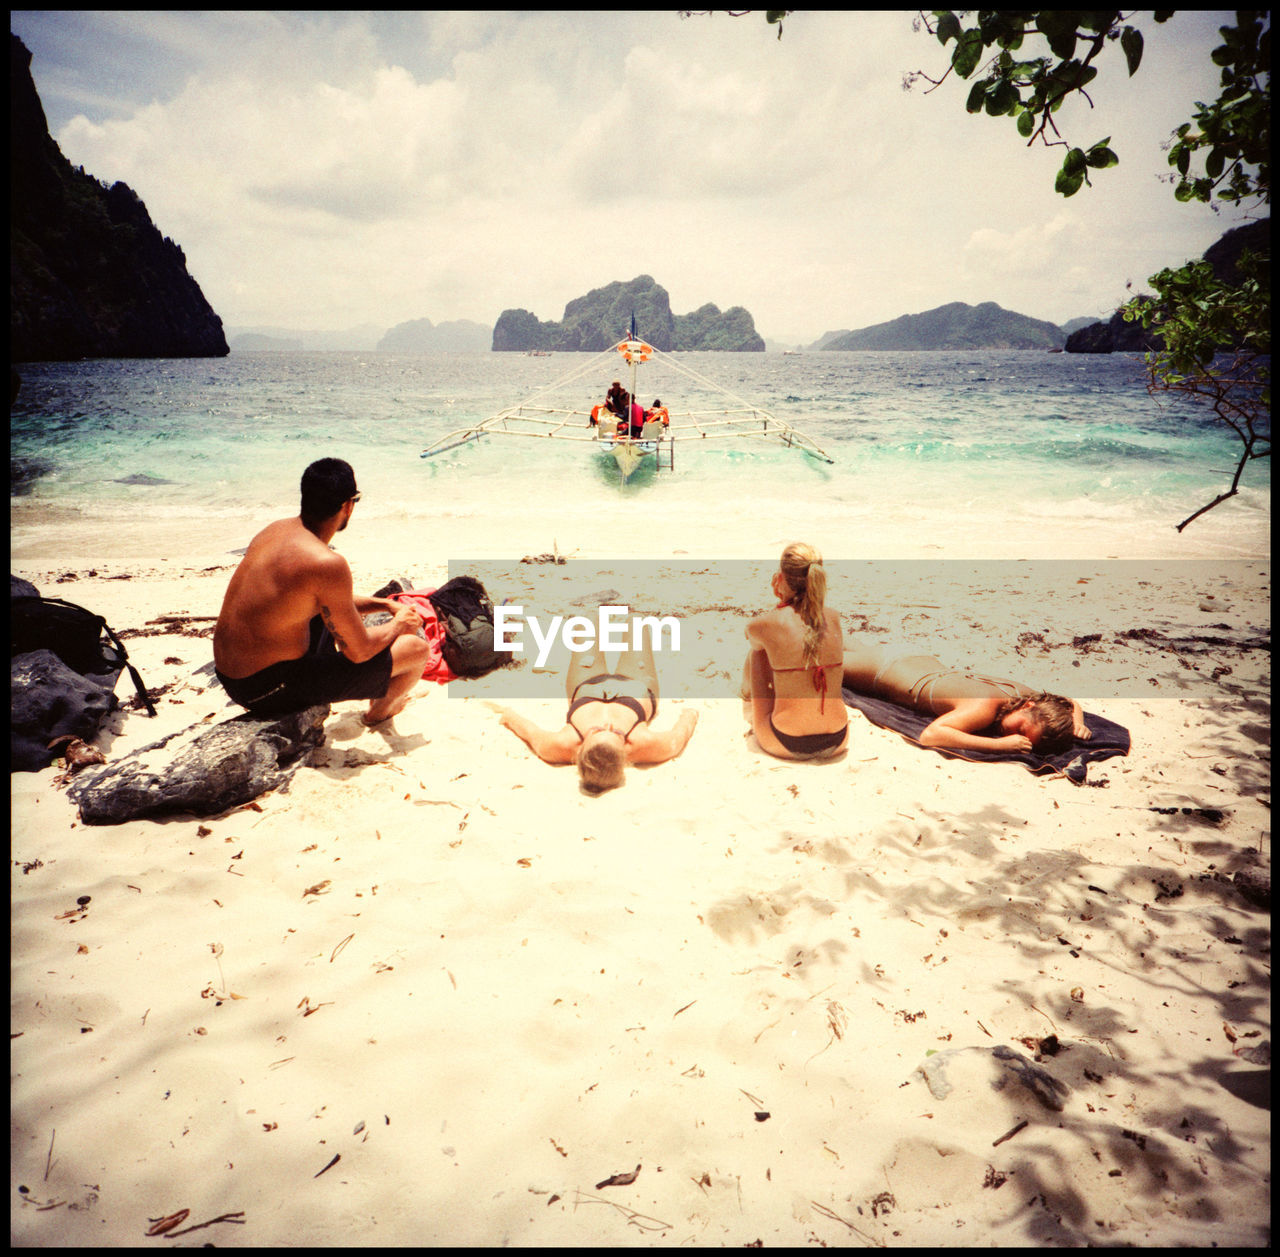 The serenity of palawan ASIA Analogue Photography Catamaran Dream El Nido Fun Nature Ocean View Philippine Island Philippines Serenity Travel Adventure Anchor Anchor On Beach Beach Boat Clear Water Completion Island Island Hopping Ocean Palawan Seafaring Water